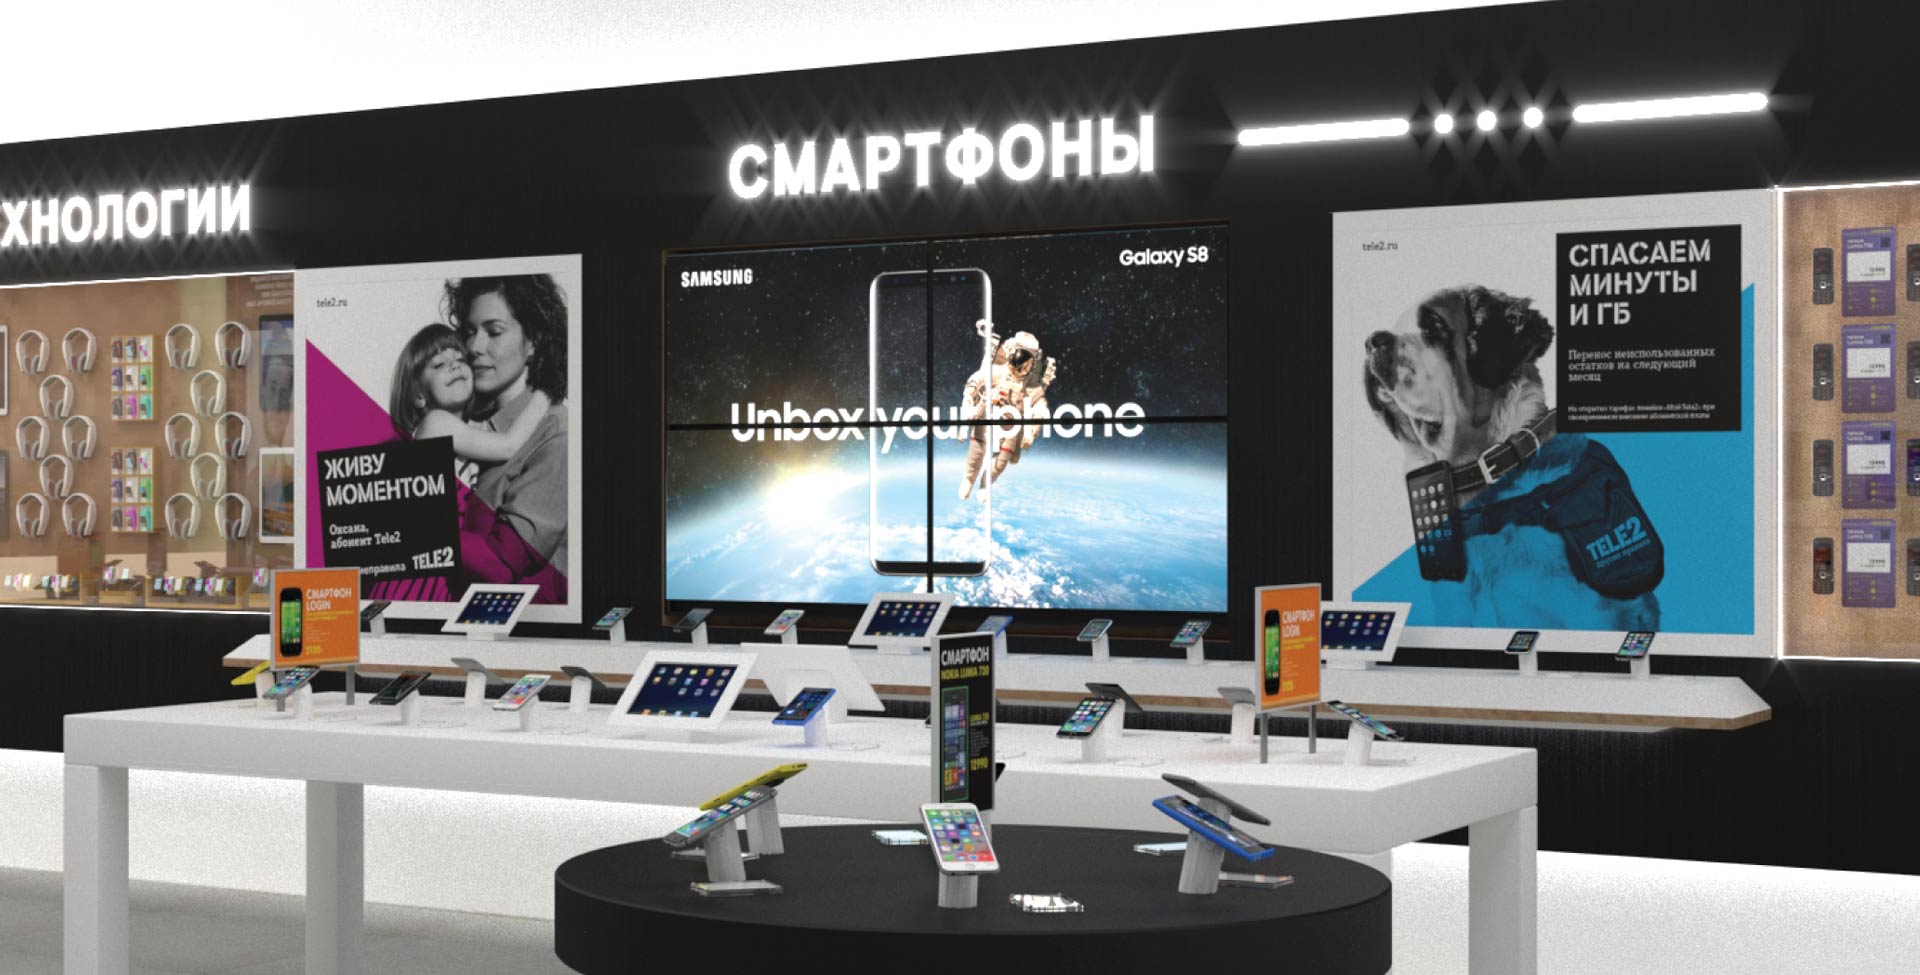 Tele2 telecoms and technology new store design smart phone branding and merchandising Russia